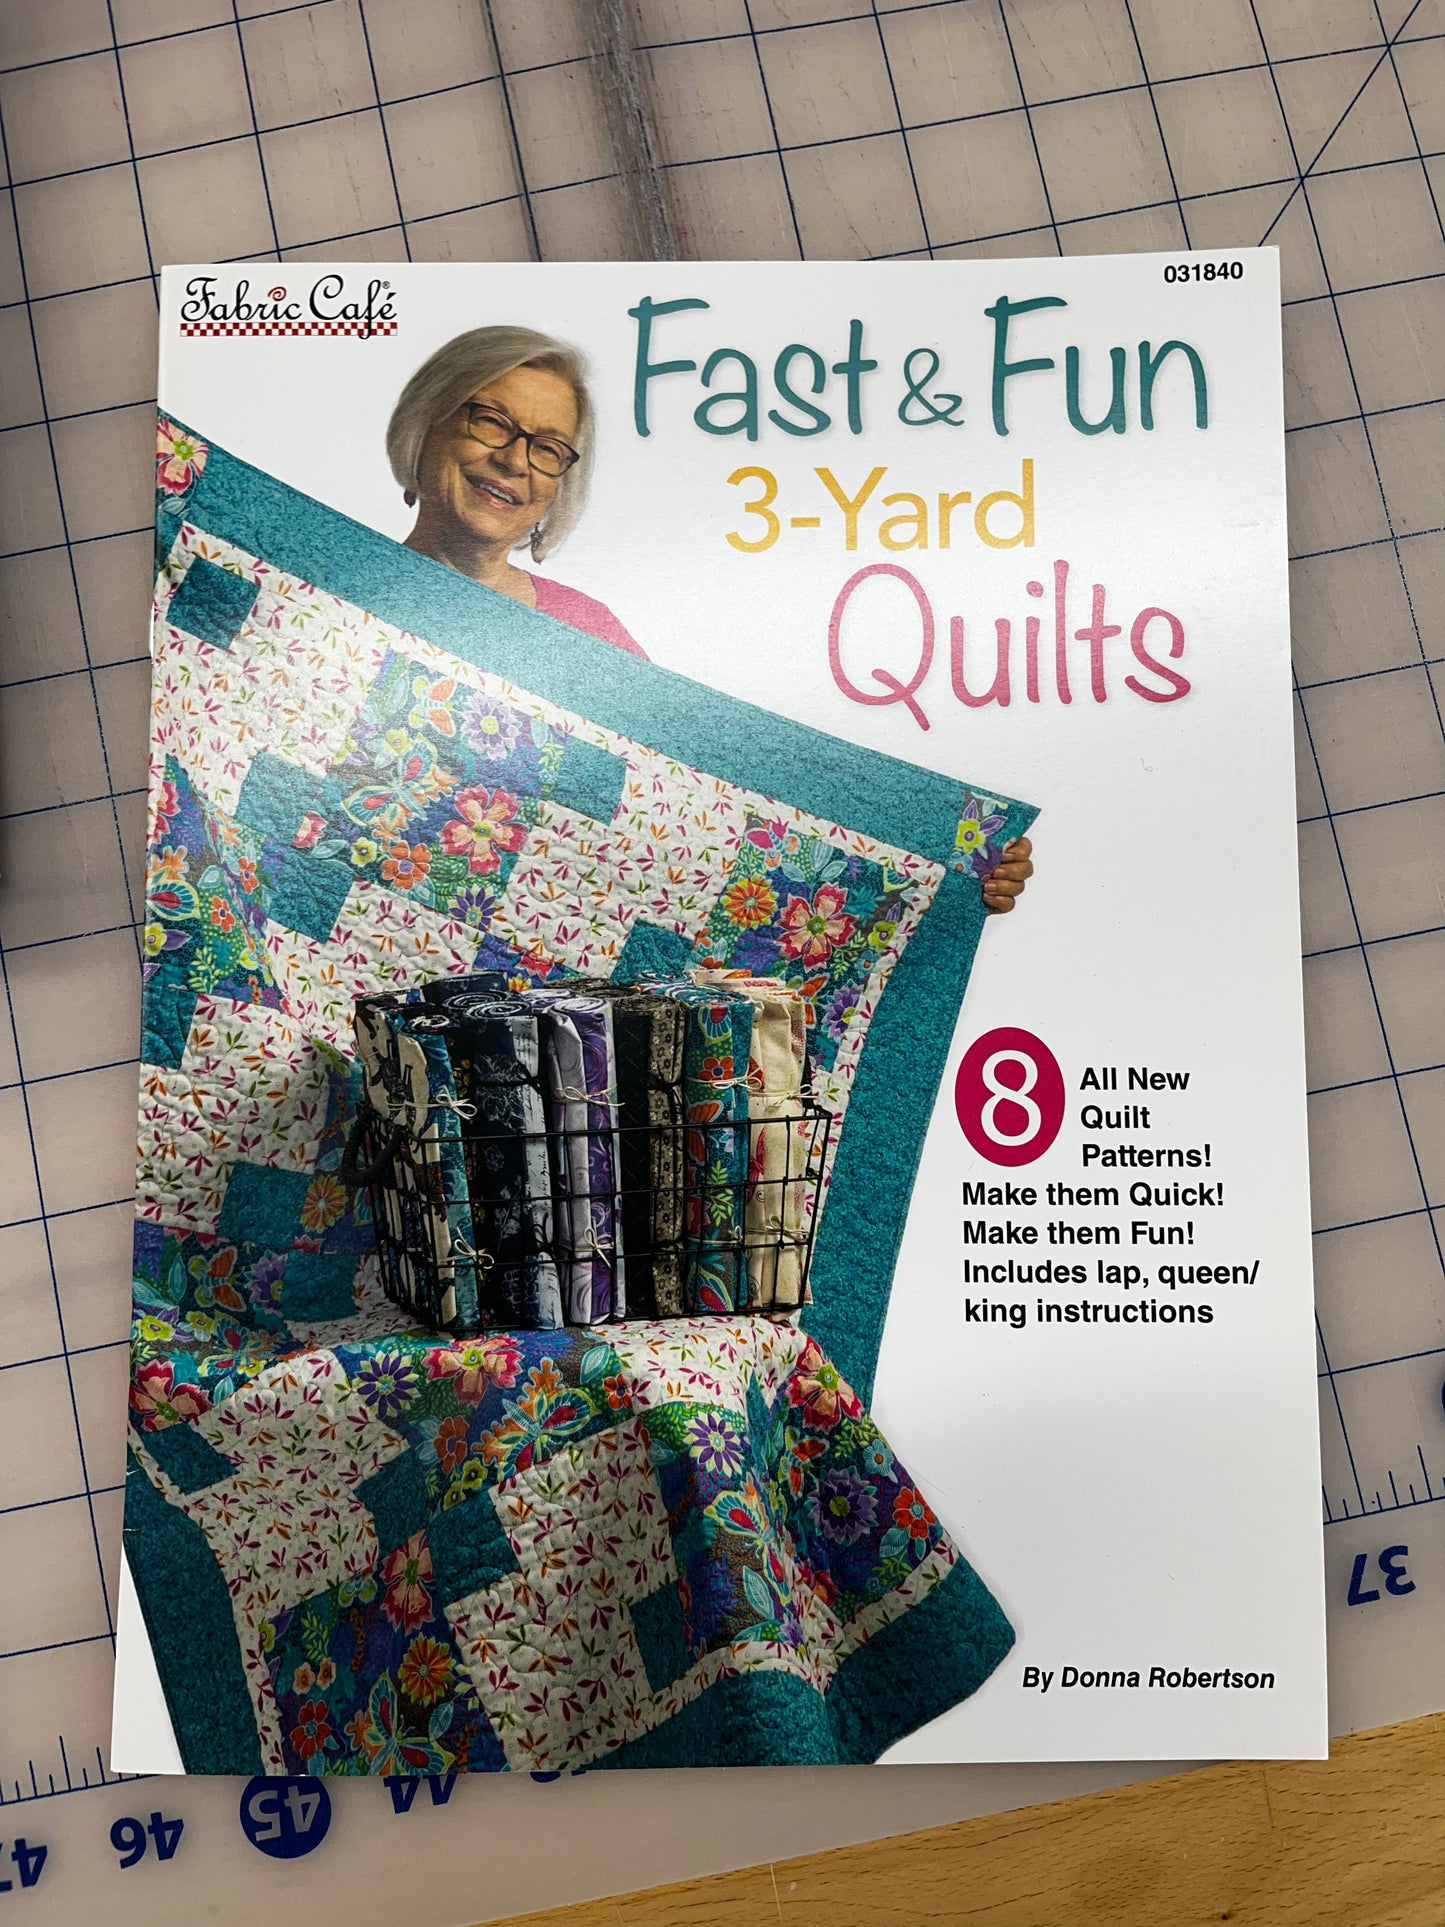 3 meter quilt- Fast and fun April 27th and 28th 10am -4:30pm